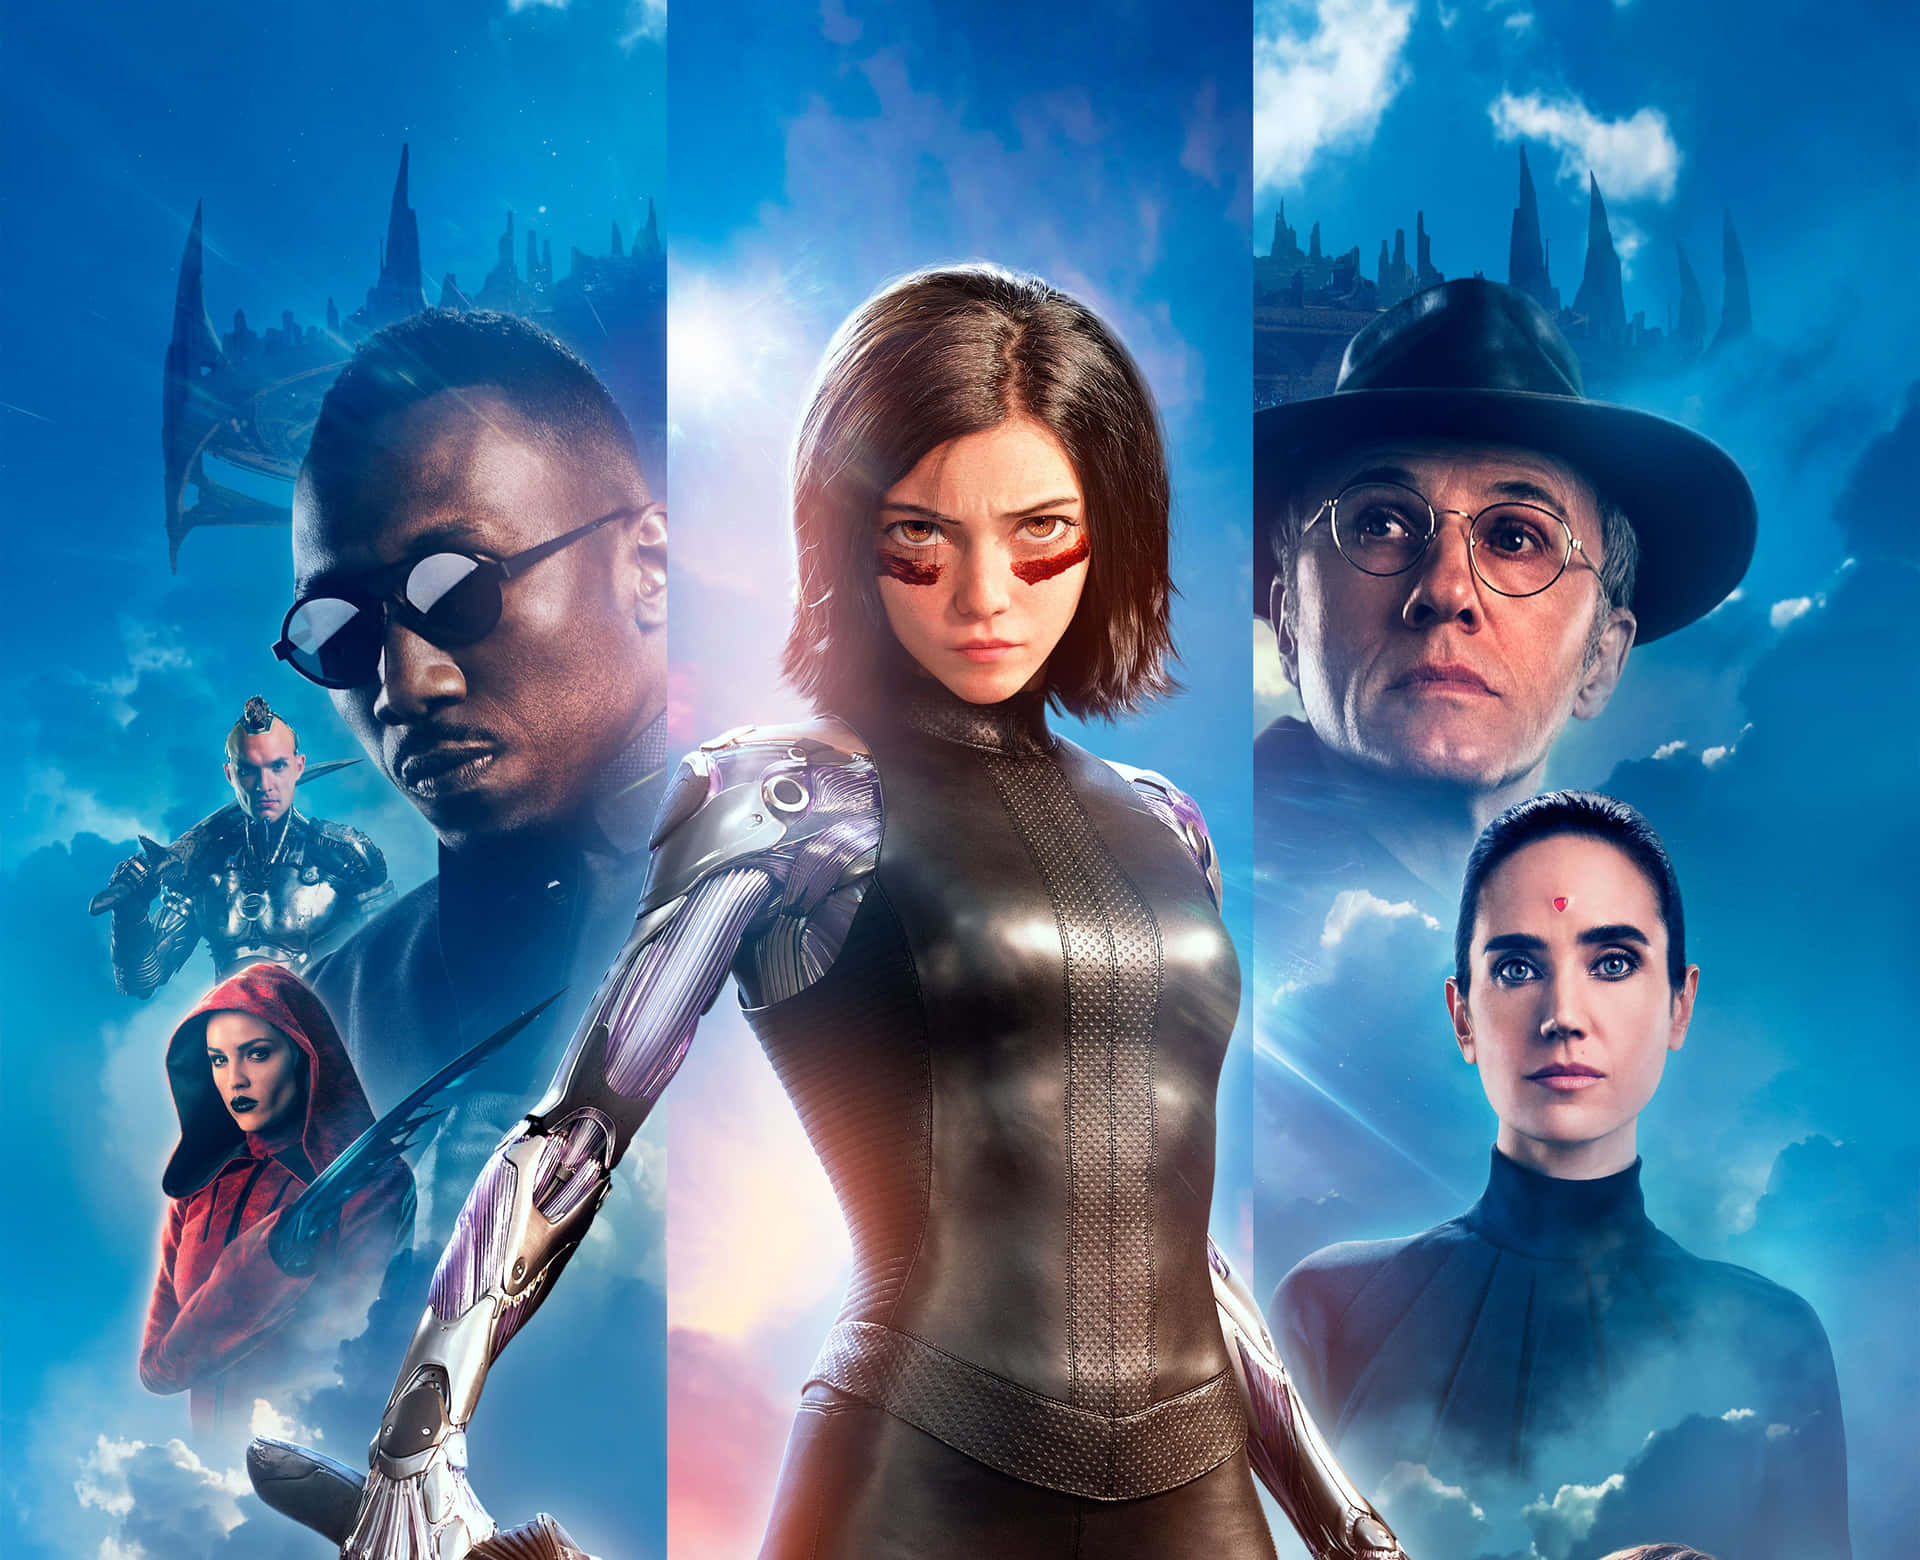 "Rise up with Alita: Battle Angel."